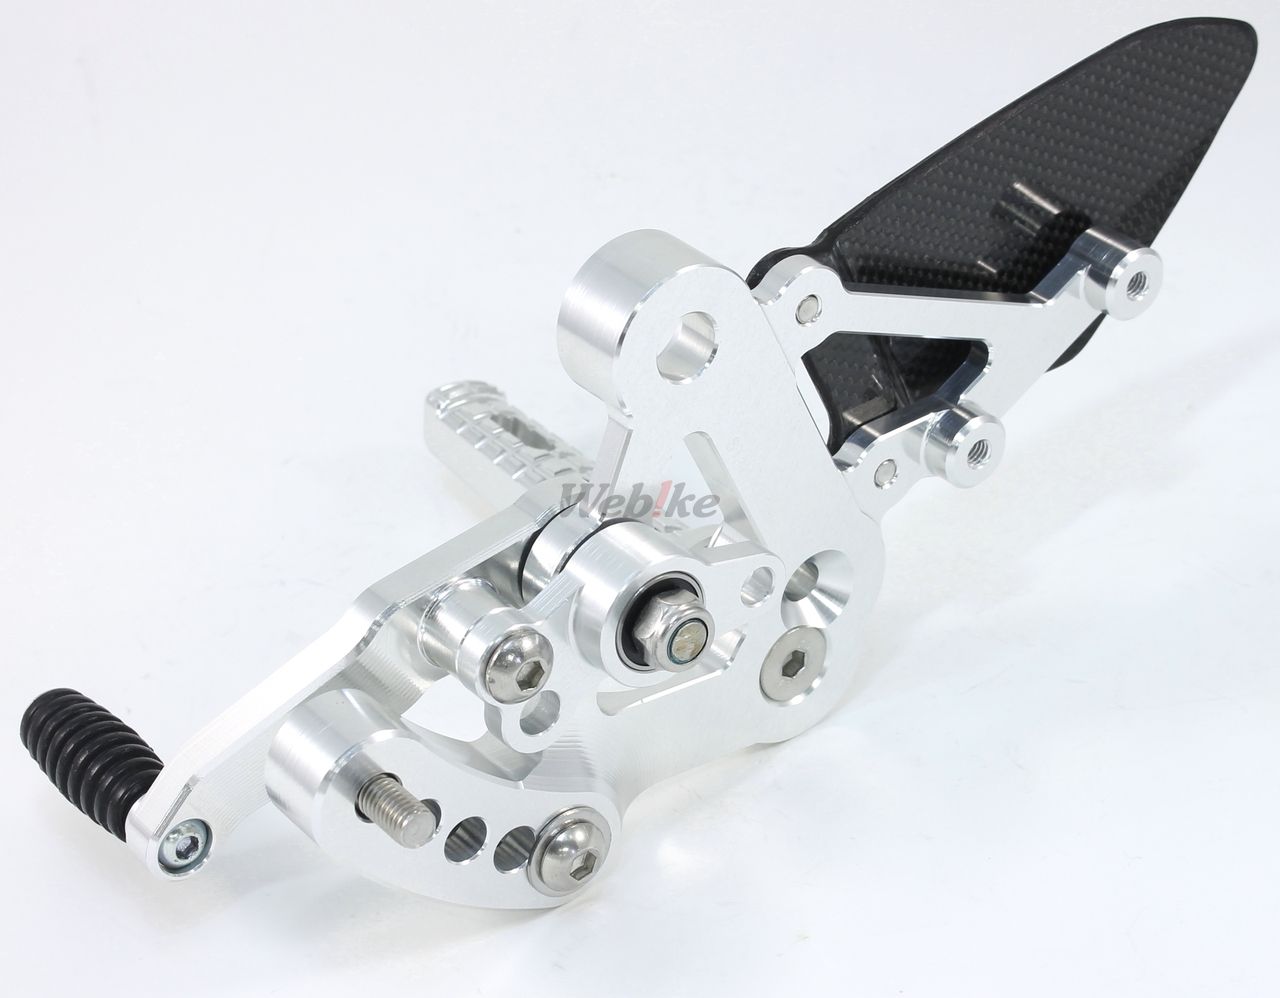 【TYGA PERFORMANCE】Racing Rear Set Kit, Adjustable, Silver with Silver Slot Cover, MSX125 Grom - Webike Thailand